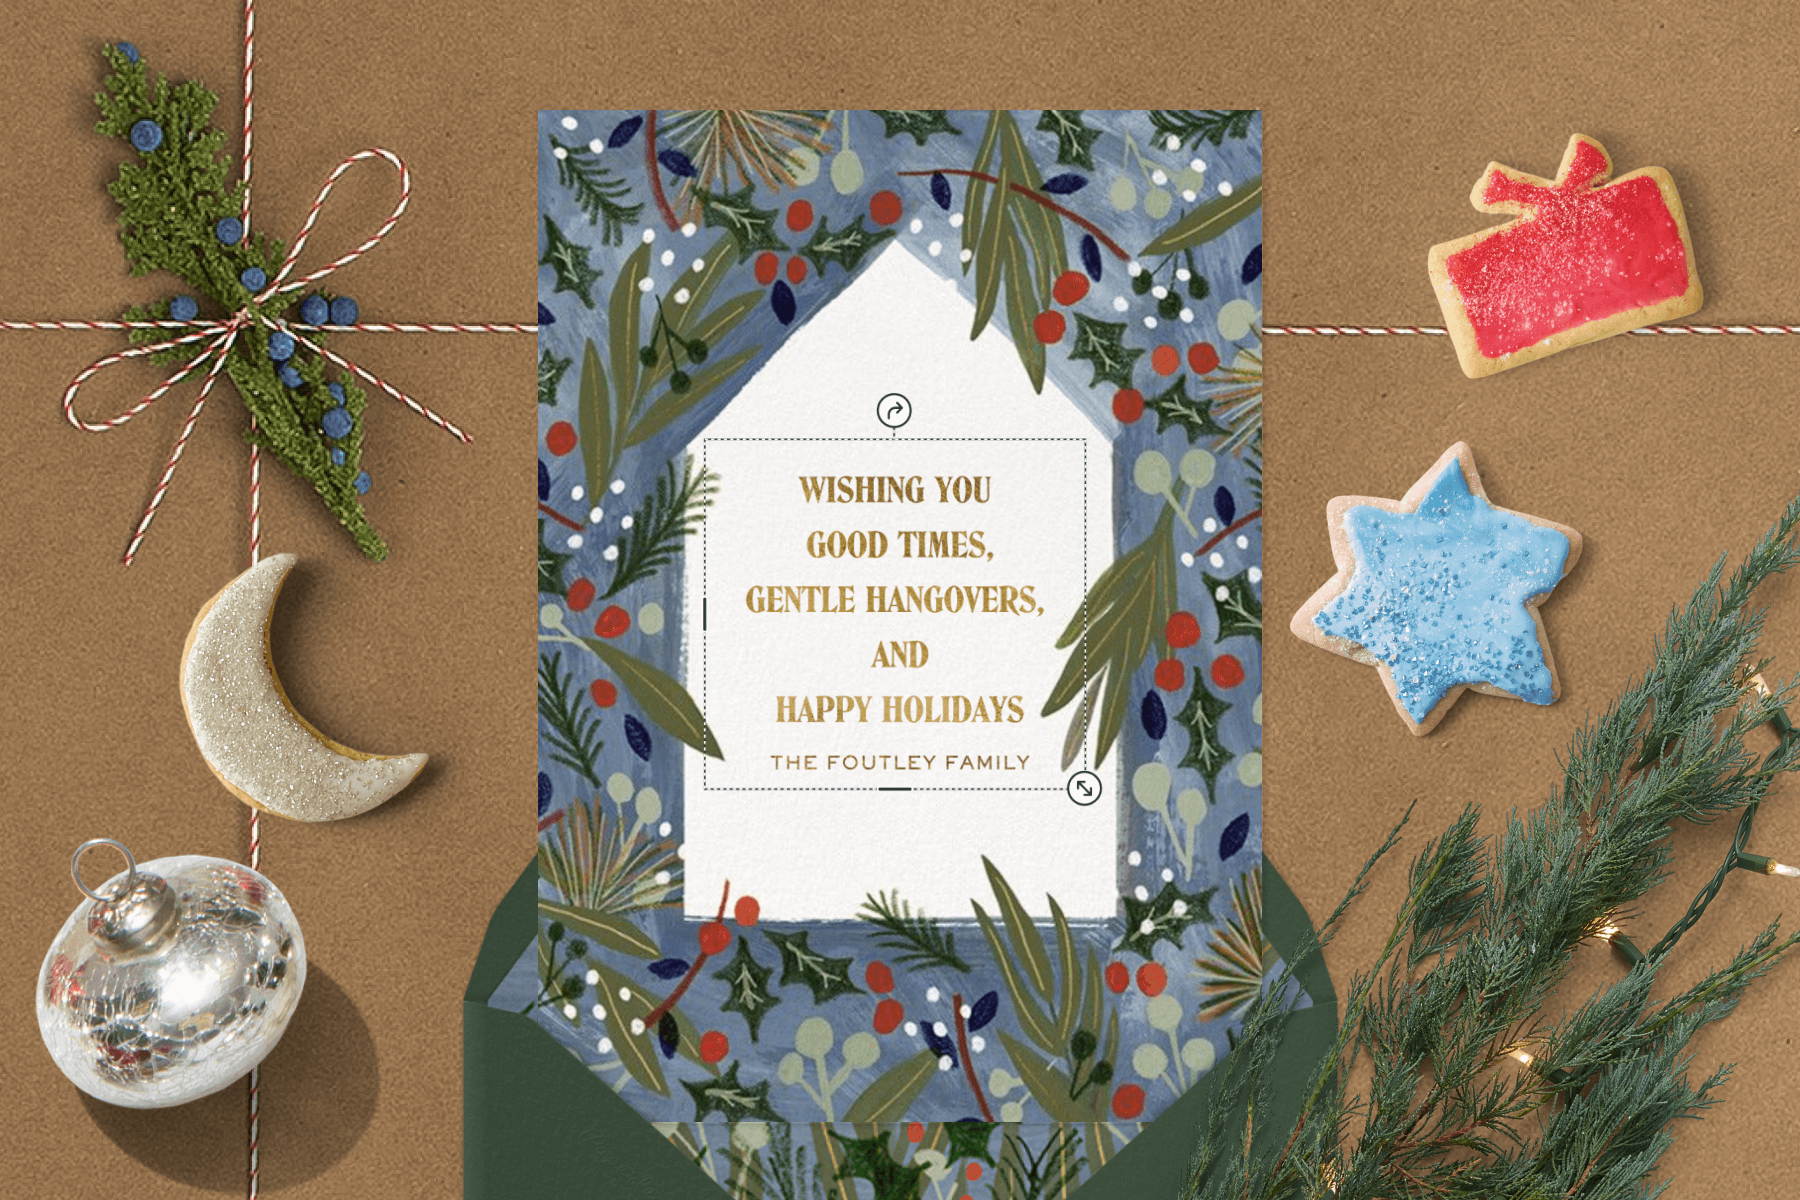 A card with a simple house shape and holly berries on a blue background, next to Christmas cookies, string lights, and decorative string.